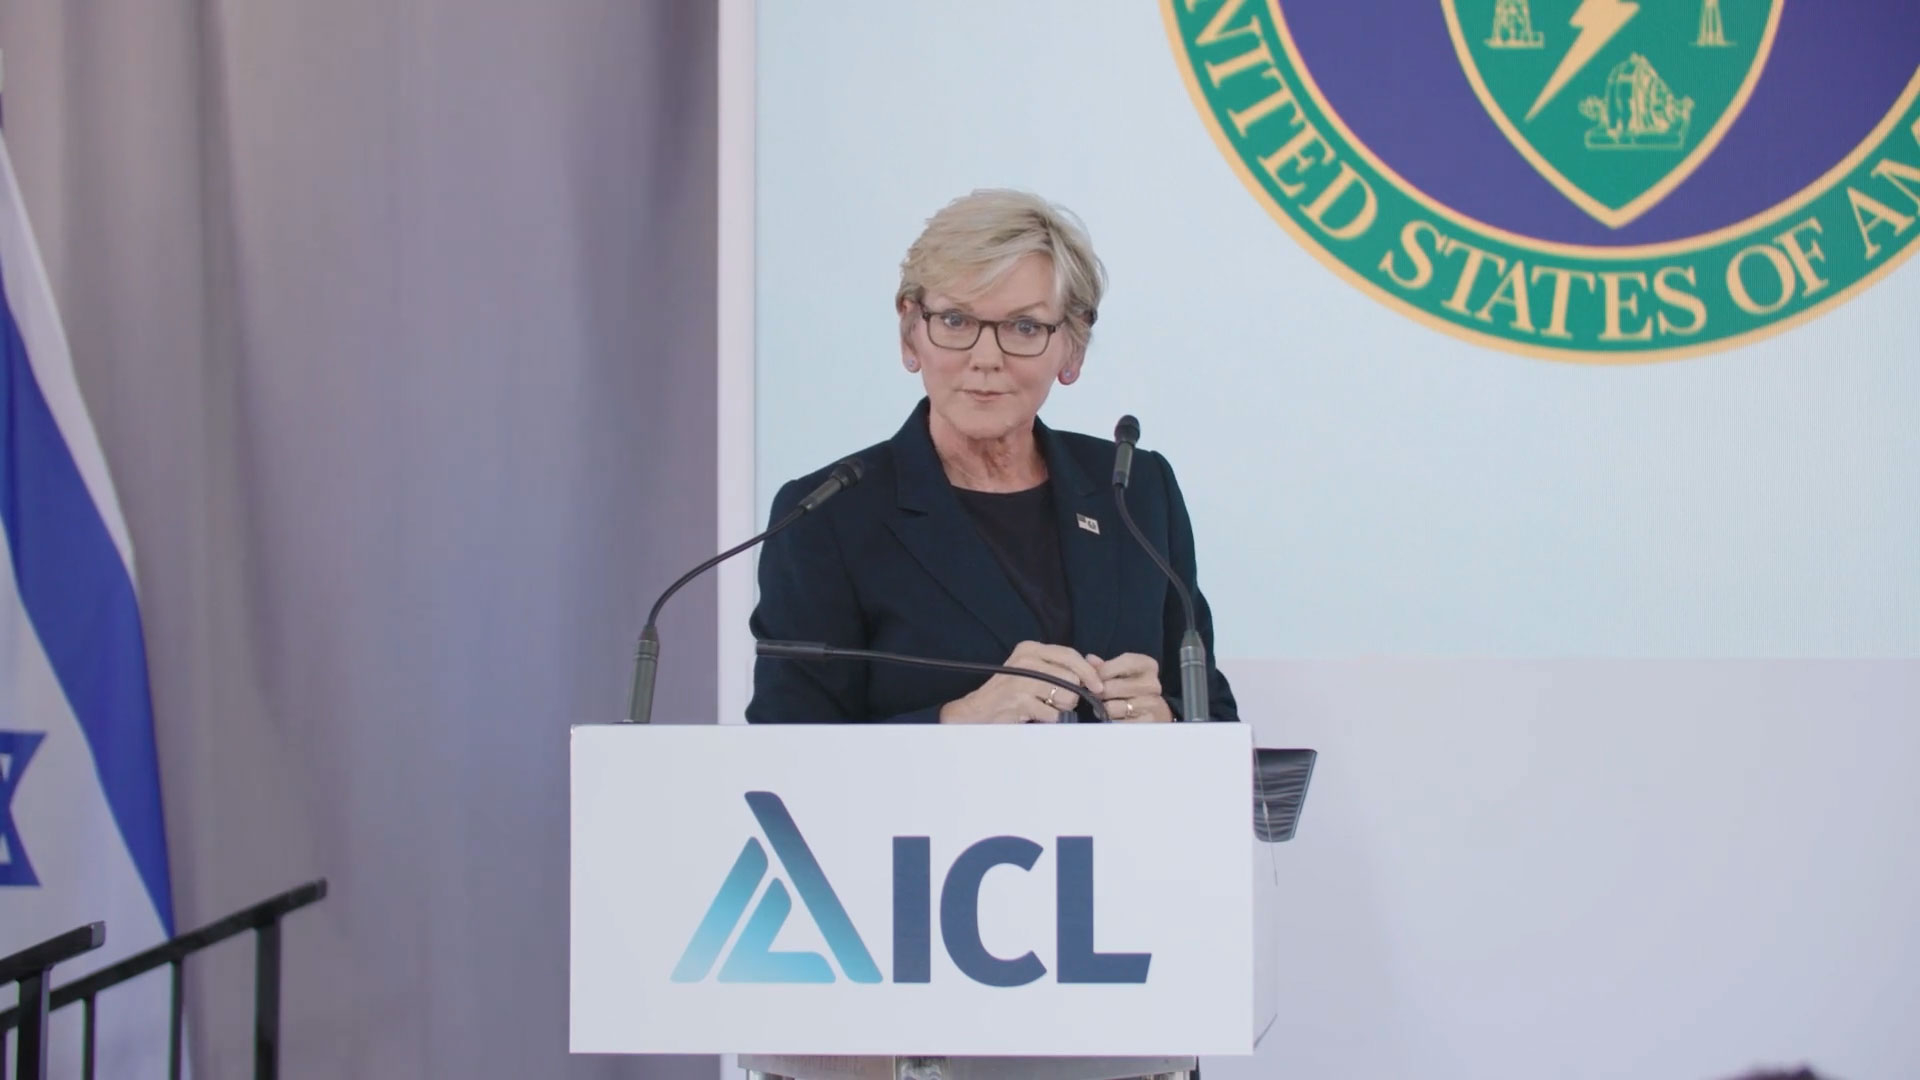 Downloadable video of ICL’s groundbreaking event for the company’s new $400 million battery materials manufacturing facility in St. Louis. Speakers include (in order): Phil Brown ICL president of Phosphate Specialties and managing director of North America, Raviv Zoller – ICL President & CEO, Jason Hall – CEO Greater STL Inc., Jared Boyd – Chief of Staff to the Mayor of St. Louis , Mike Parson – Governor of Missouri, Jennifer M. Granholm – Secretary, United States Department of Energy. Video Credit: ICL.